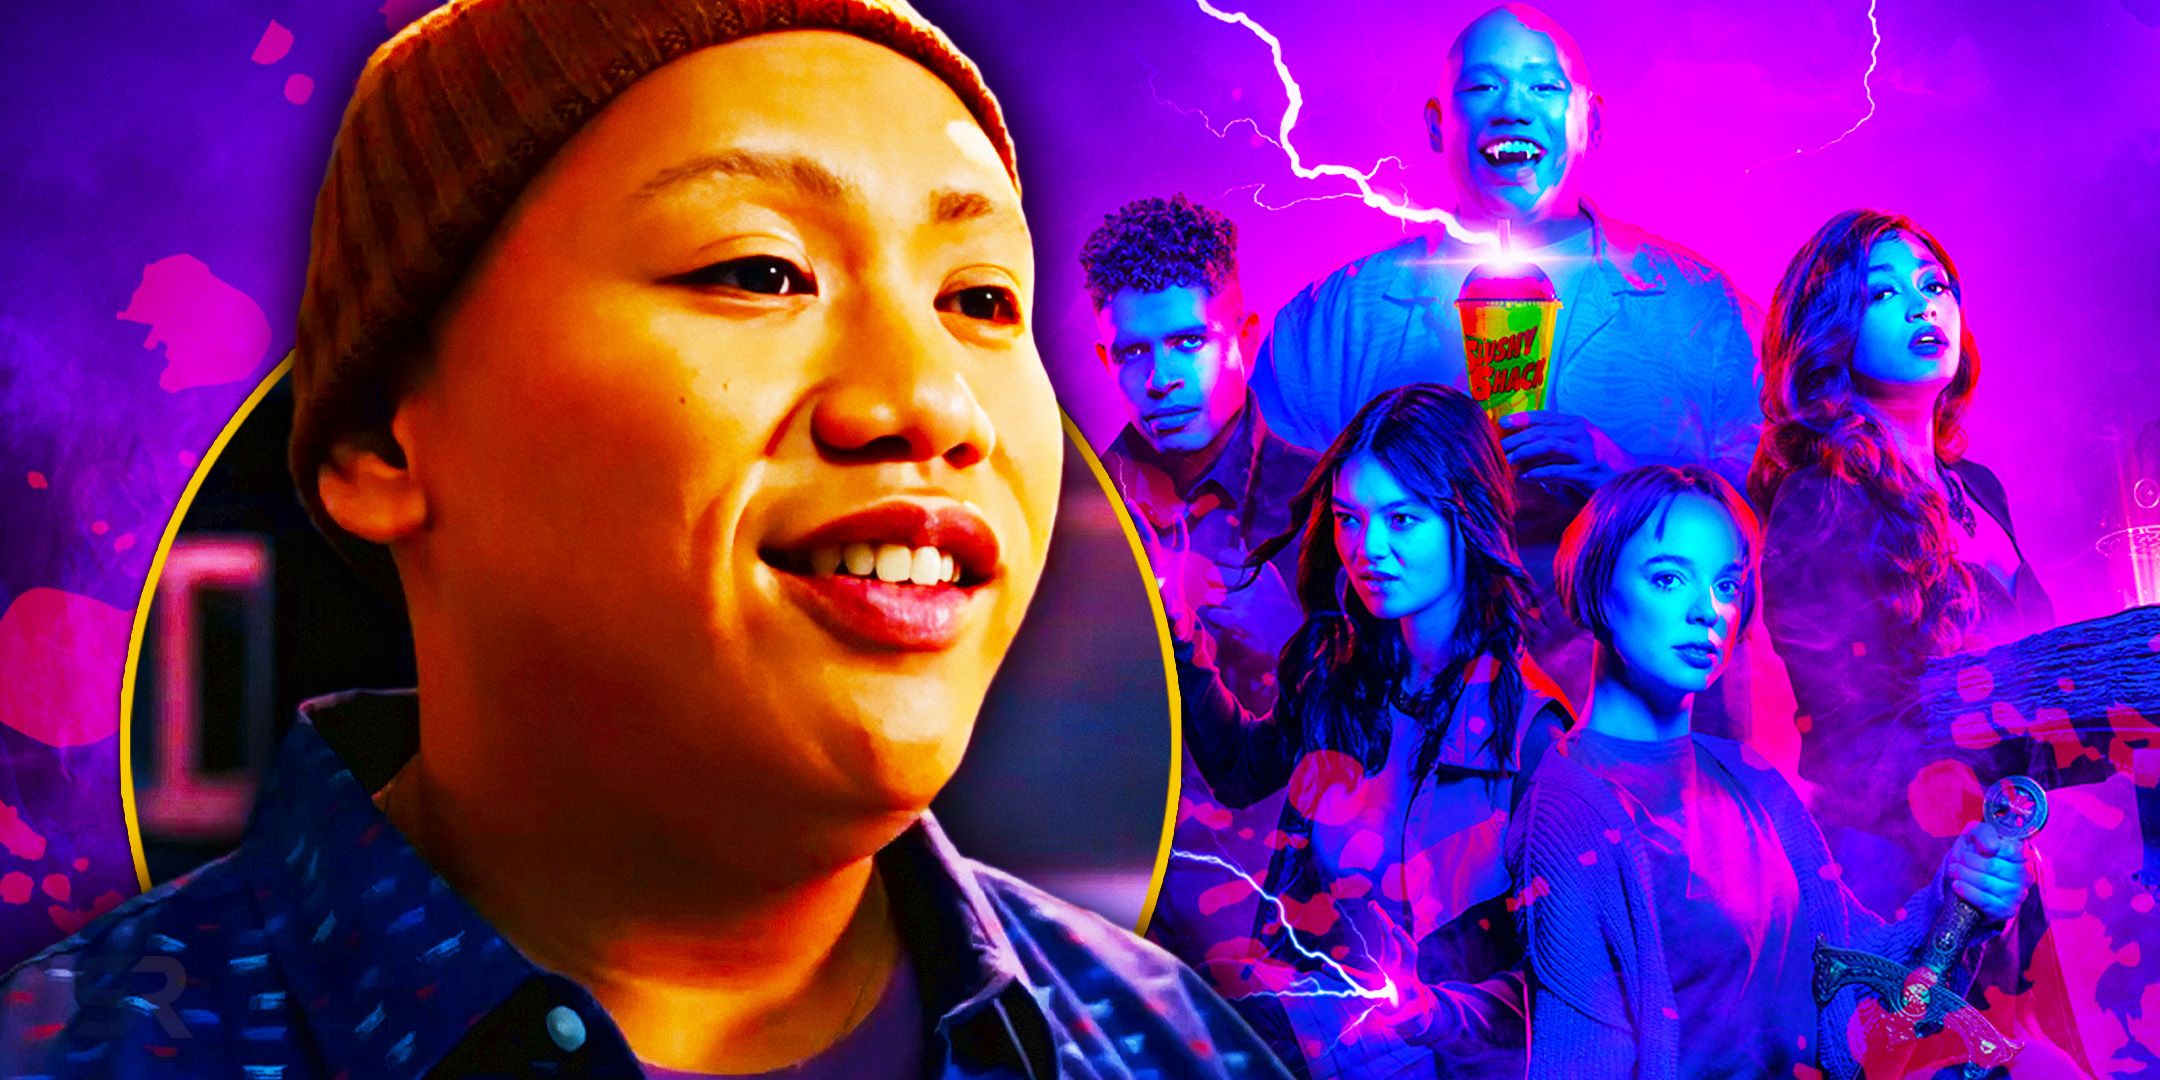 Reginald The Vampire Season 2: Jacob Batalon Teases The Aftermath Of The Angel's Arrival In New Episodes